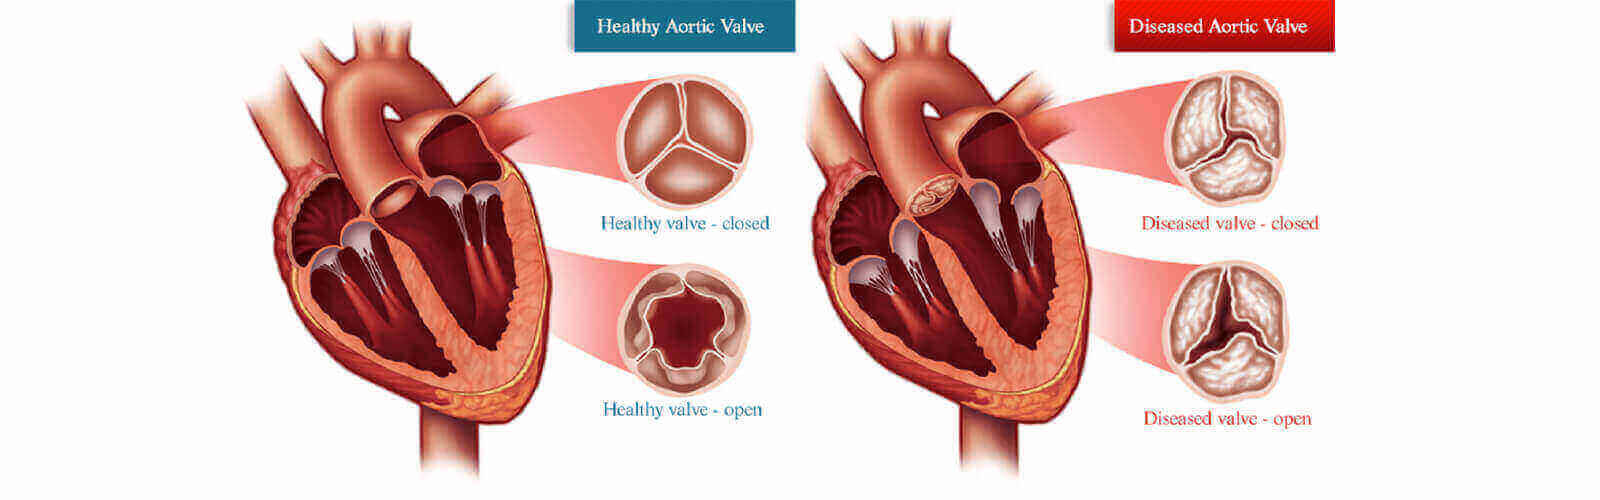 Heart Valve Replacement Surgery in California